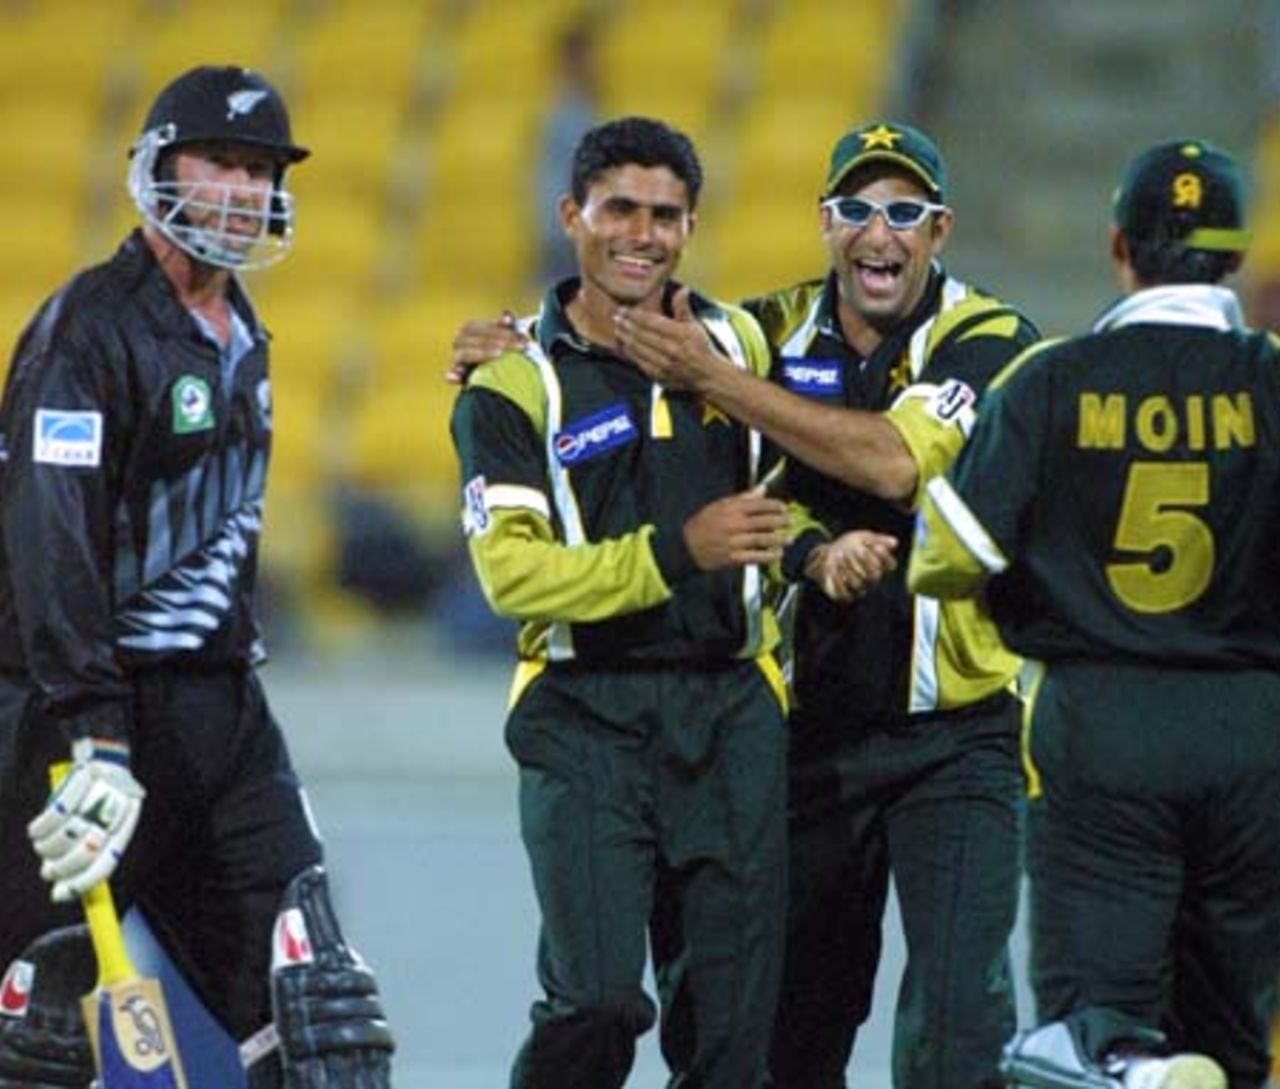 New Zealand batsman Chris Harris walks off the field after umpire Dave Quested adjudged him out leg before wicket off the bowling of Pakistan fast medium bowler Abdur Razzaq for 11. Razzaq is congratulated by team-mates Wasim Akram and Moin Khan. 3rd One-Day International: New Zealand v Pakistan at WestpacTrust Stadium, Wellington, 22 February 2001.